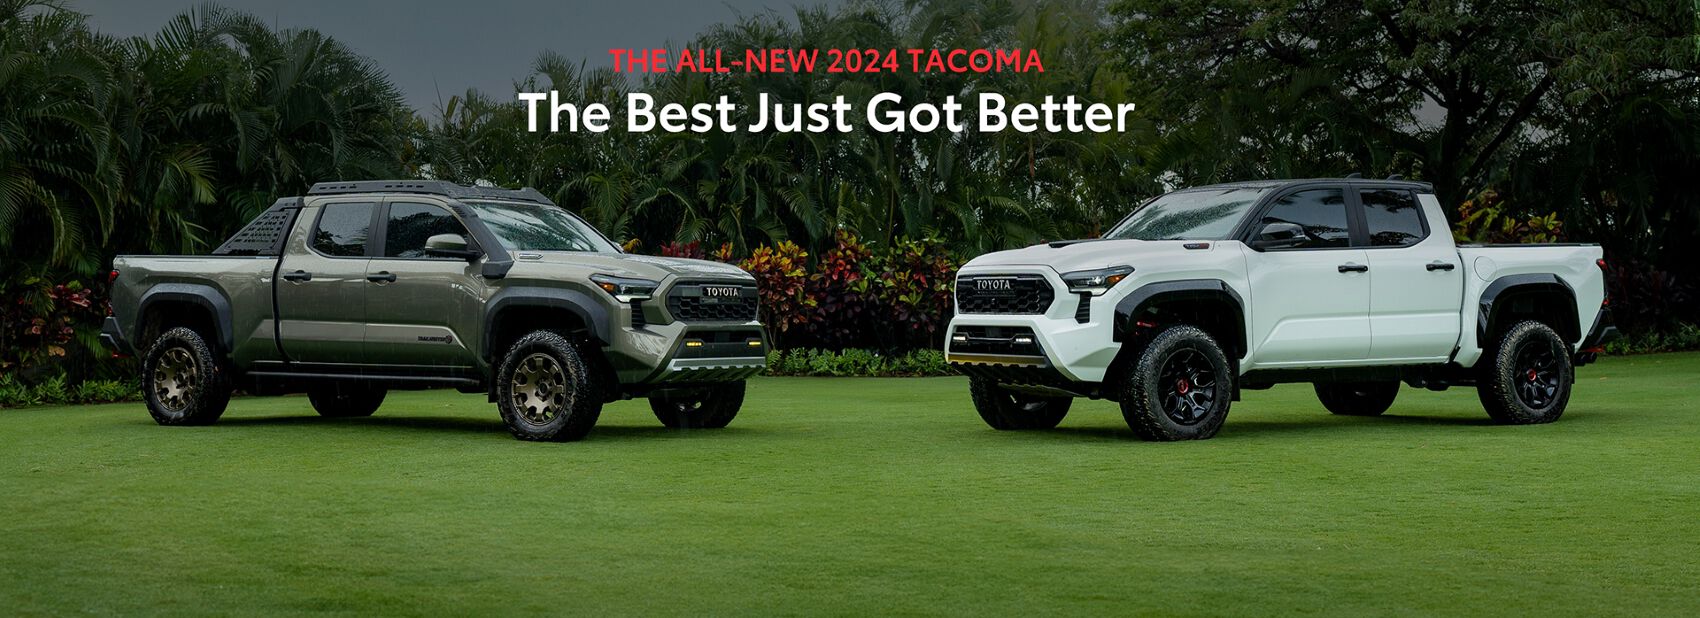 The All-New 2024 Tacoma. The best Just Got Better.